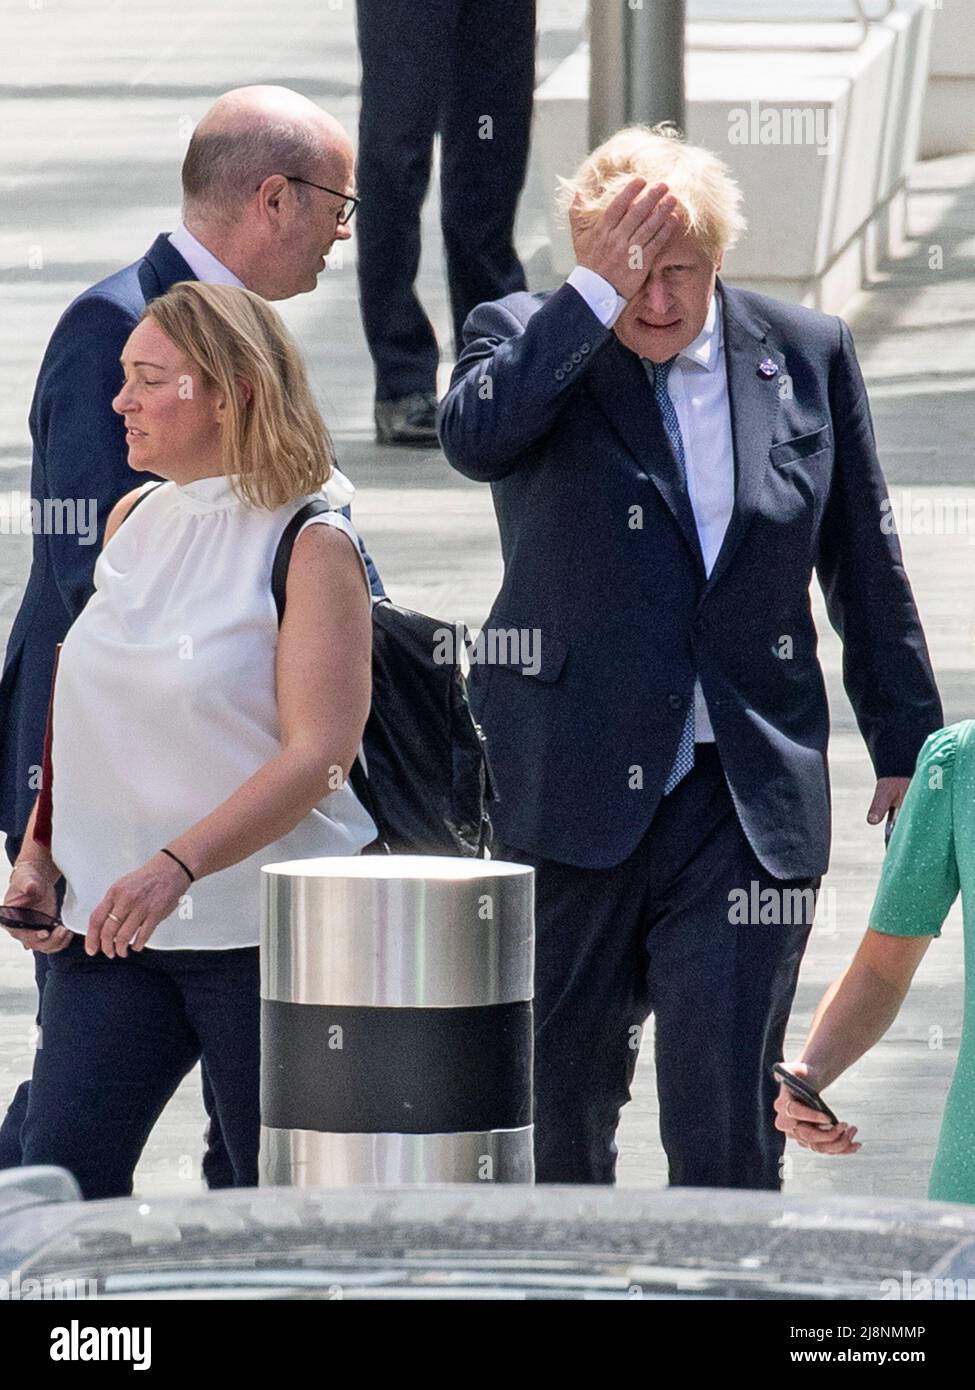 London - 17/05/2022. Prime Minister Boris Johnson is seen with his hand on his head as he leaves the opening of the new Elizabeth Line that was attended by Her Majesty Queen Elizabeth, at Paddington Station, West London. Mr Johnson and the Government are under pressure to resolve the Northern Ireland Protocol issues. Credit: Alamy Live News/Joshua Bratt Stock Photo